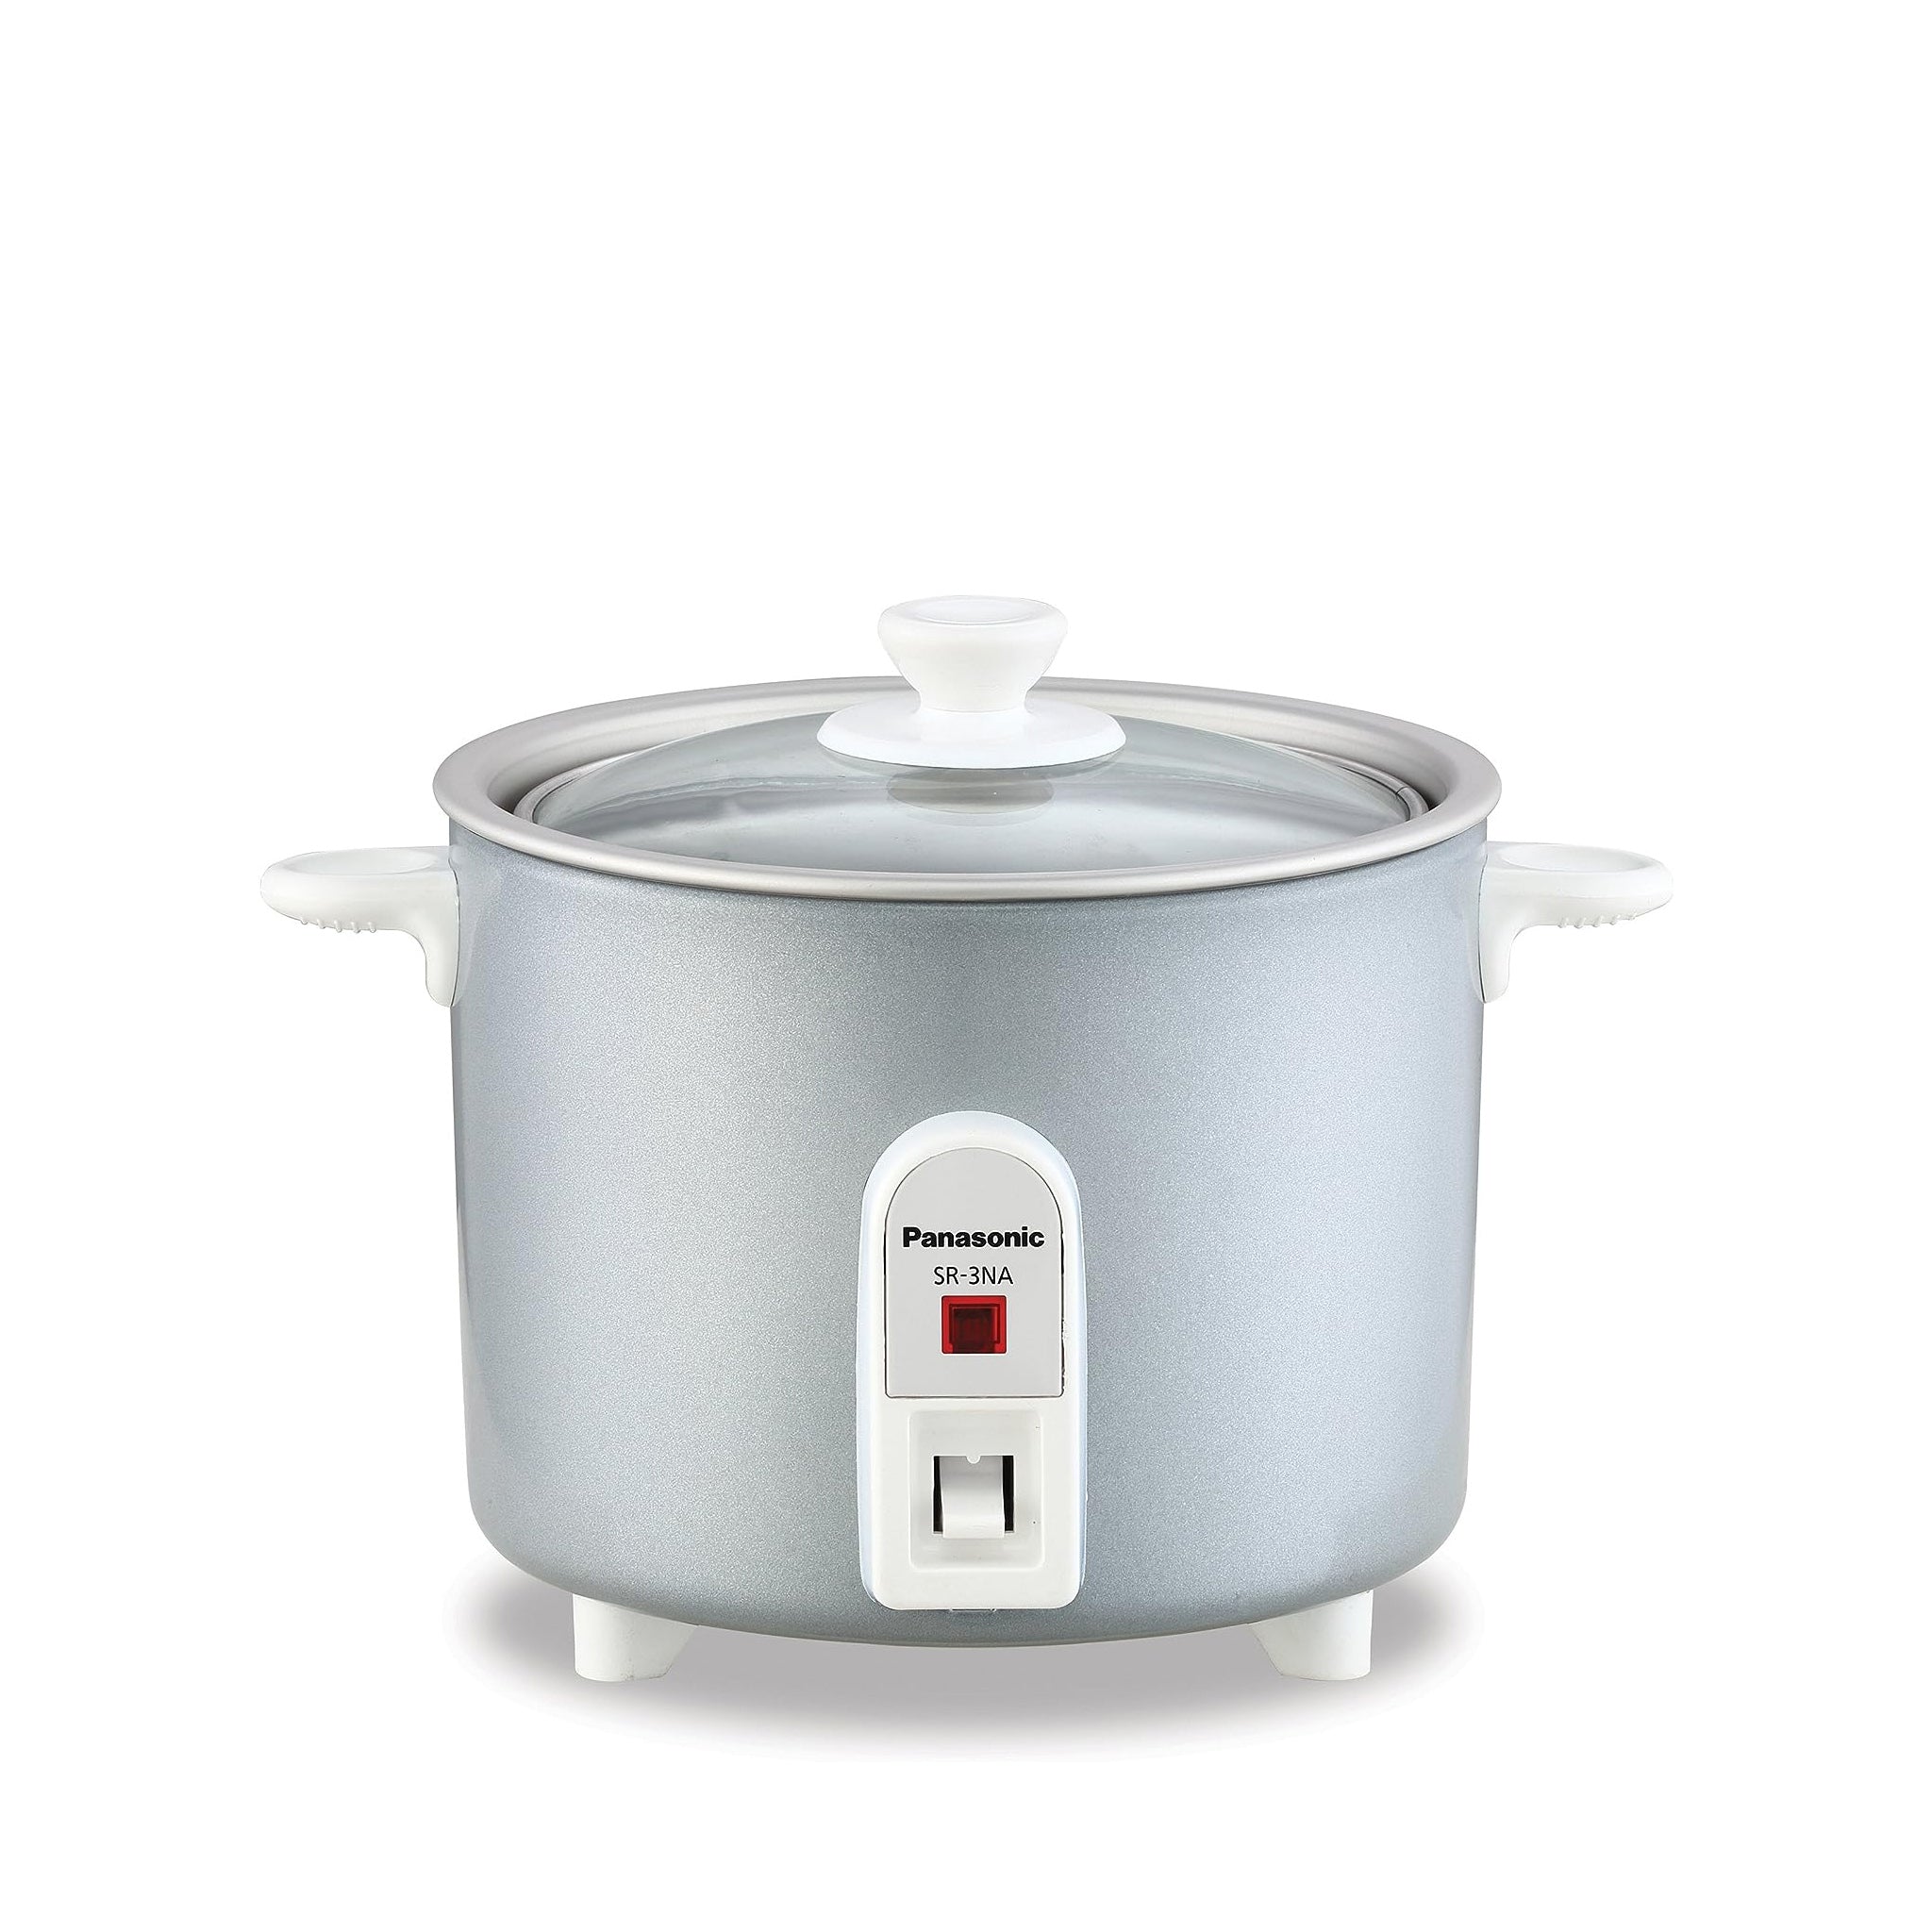 Rice/Grain Cooker - 1.5 Cup Uncooked Rice Capacity